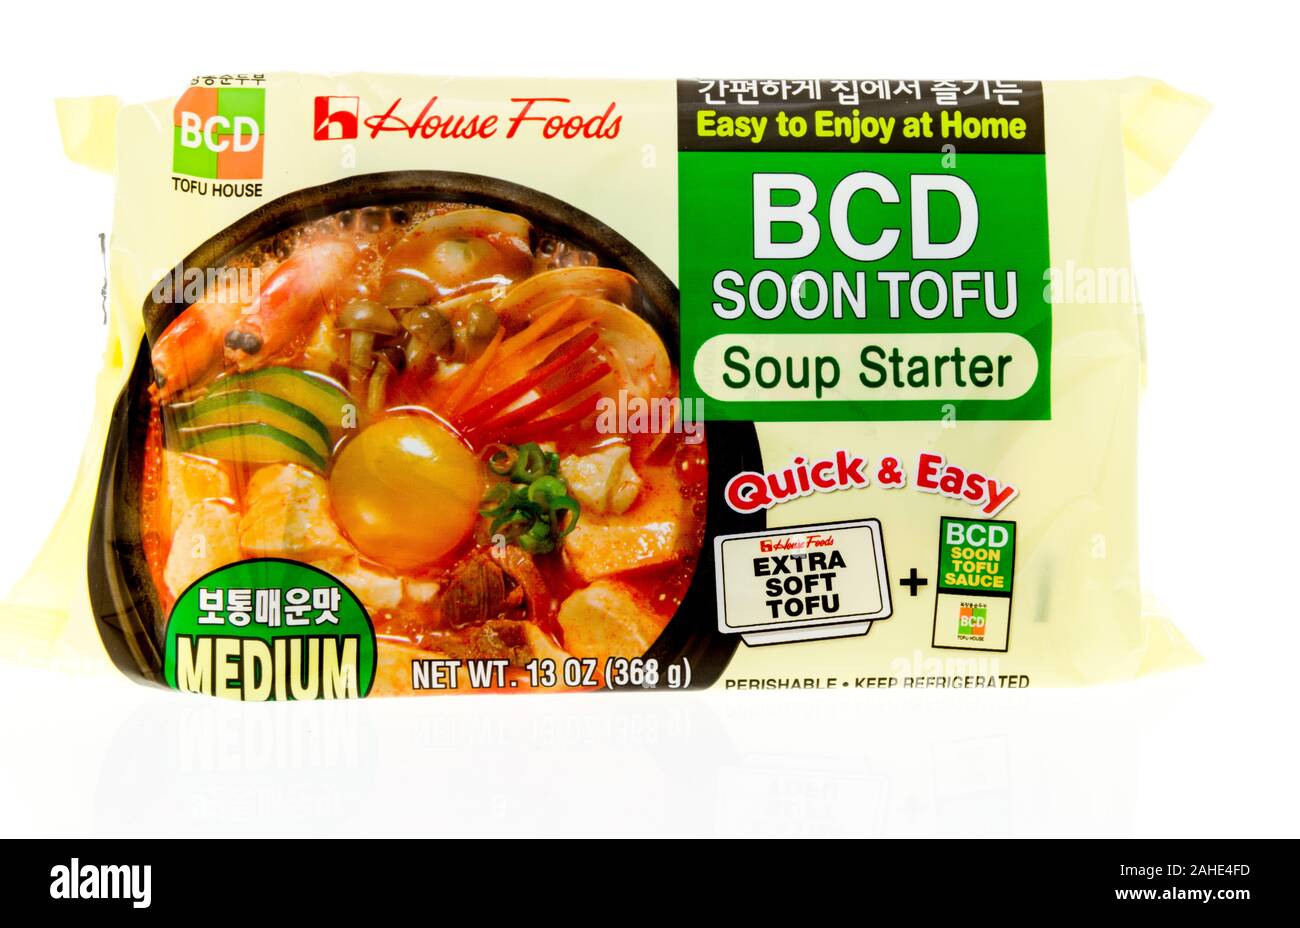 Winneconne, WI - 17 June 2019 : A package of BCD tofu house foods tofu soup starter on an isolated background Stock Photo